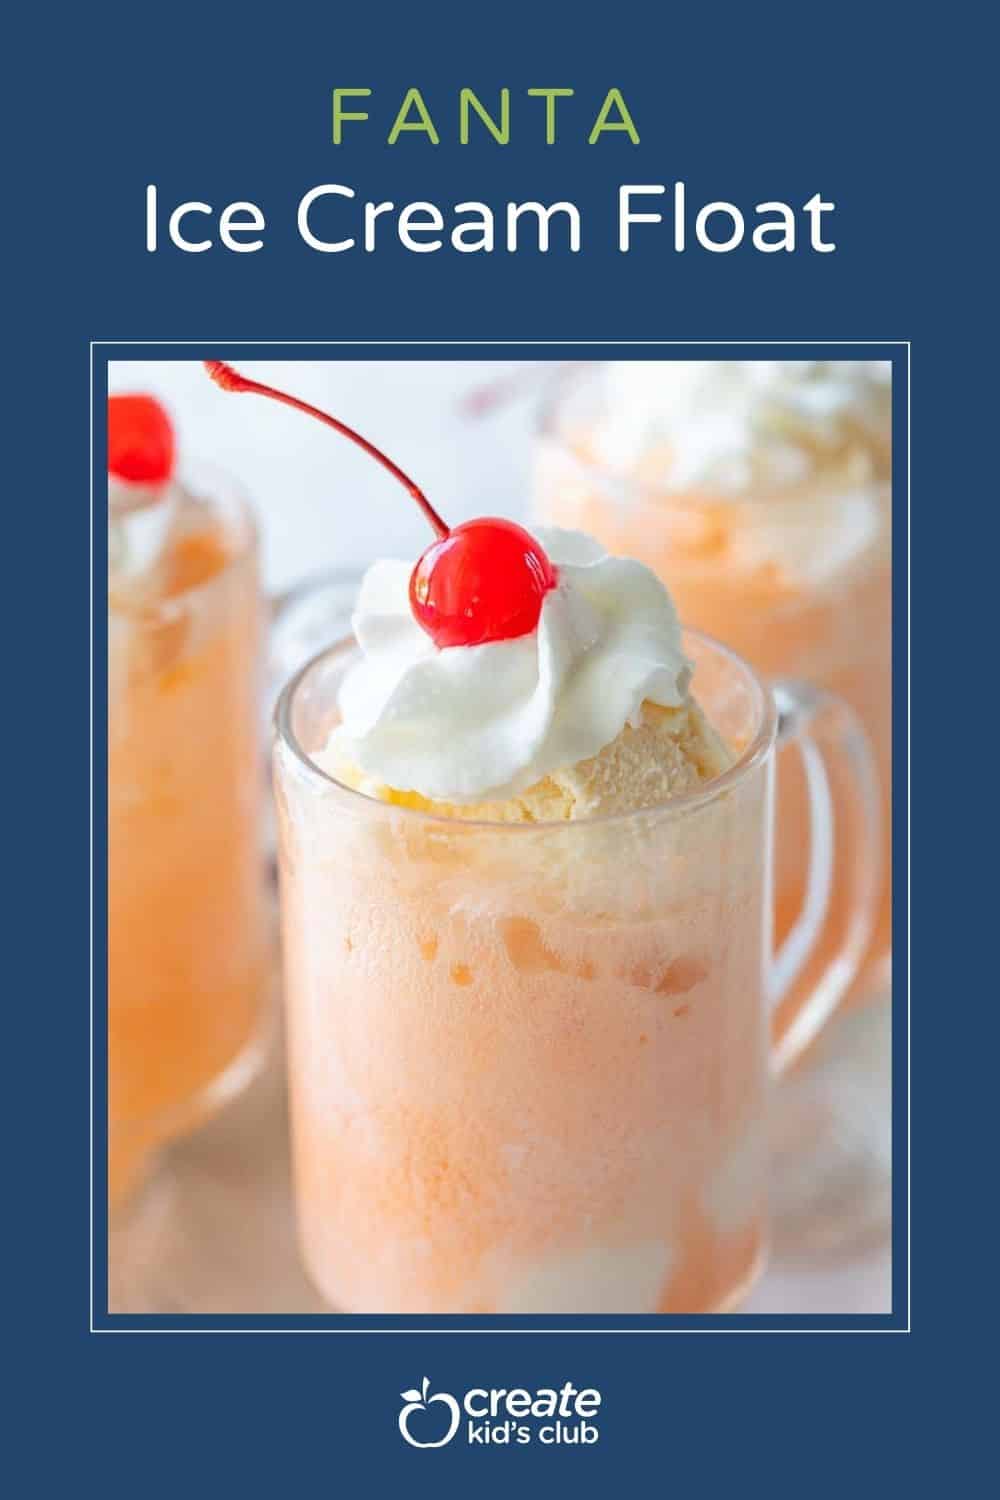 a fanta ice cream float in a glass with whipped cream and a cherry on top